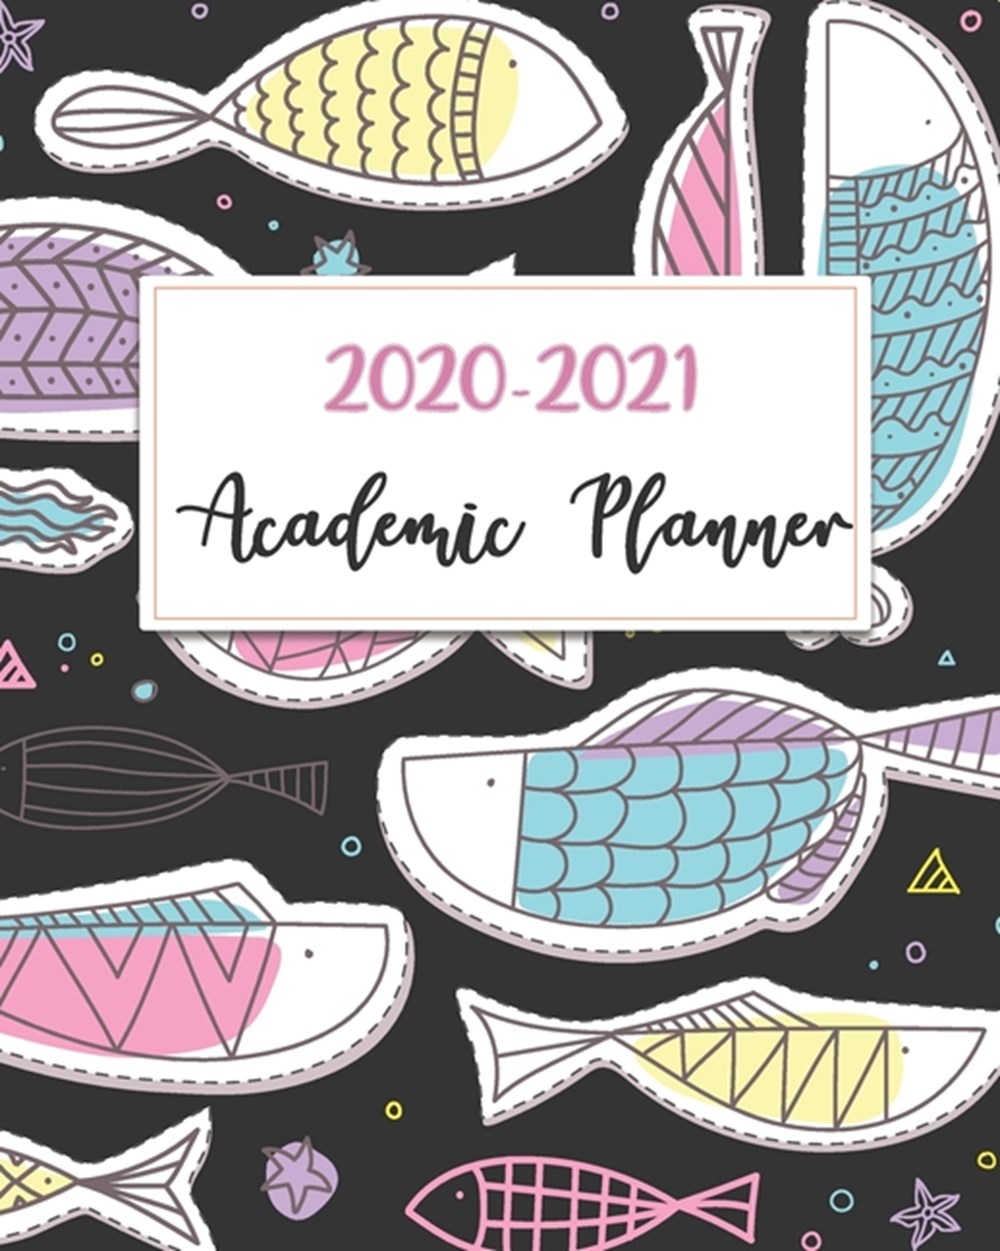 2020-2021 Academic Planner Carton Fish, 24 Months Academic Schedule With Insporational Quotes And Ho